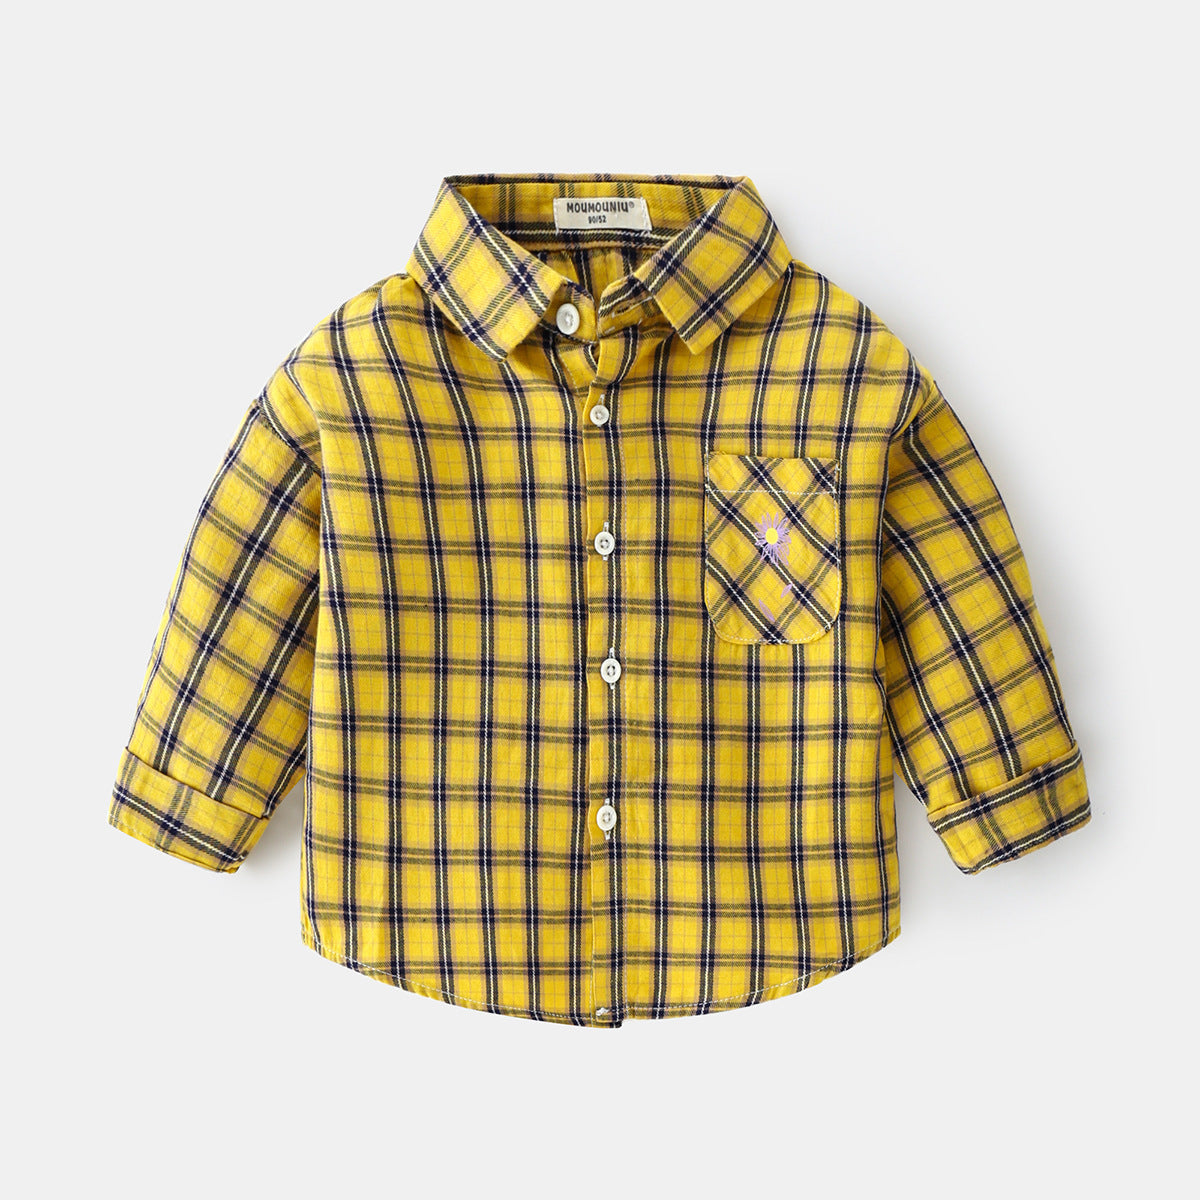 Boys' new plaid button-down shirt with long sleeves, perfect for layering